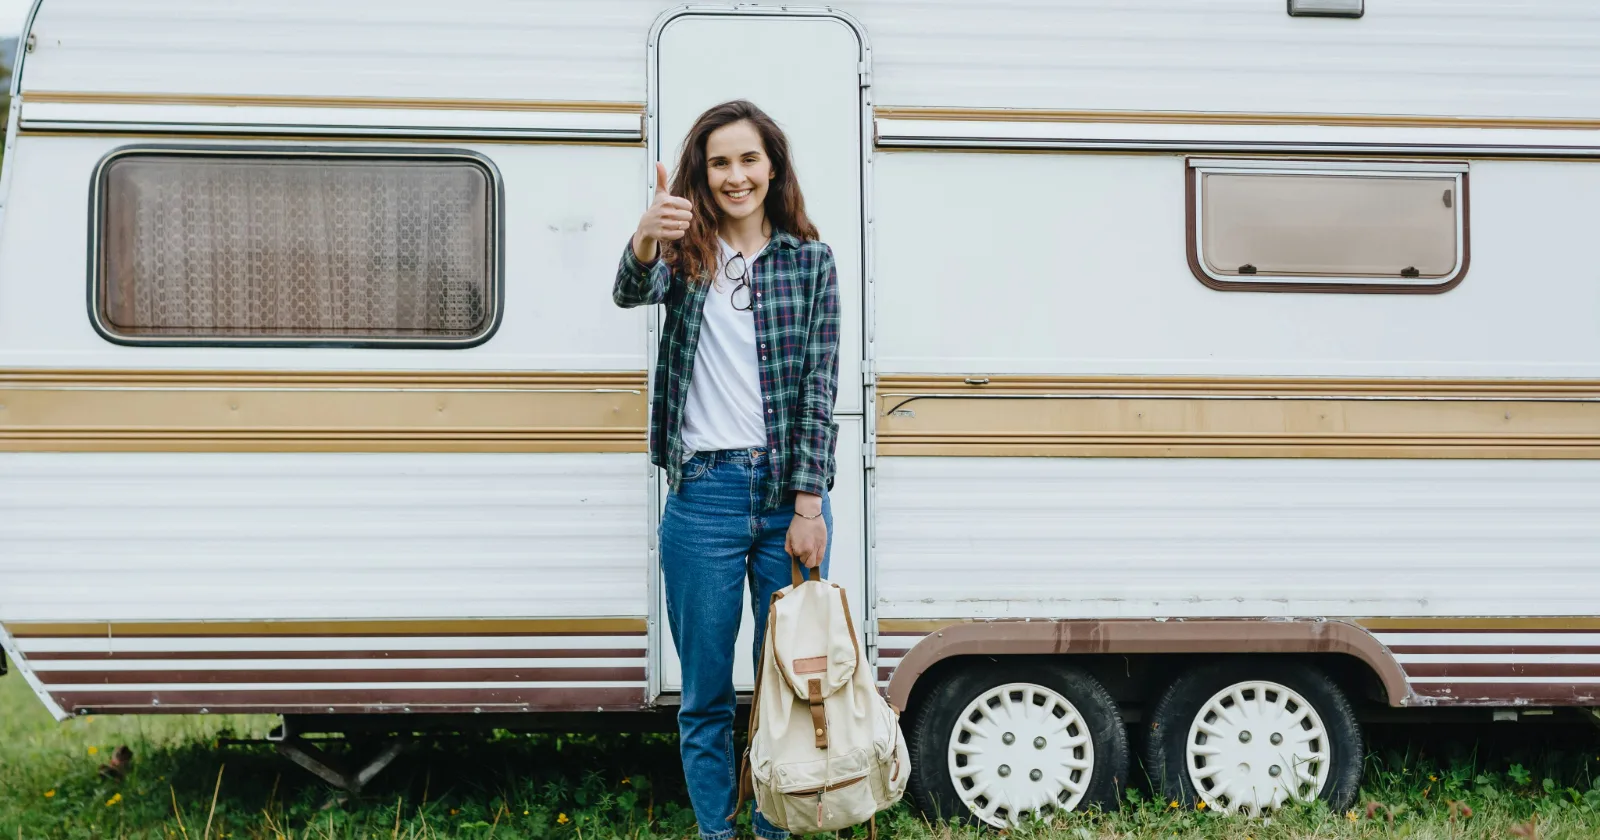 Girl standing in front of travel trailer giving the thumbs up